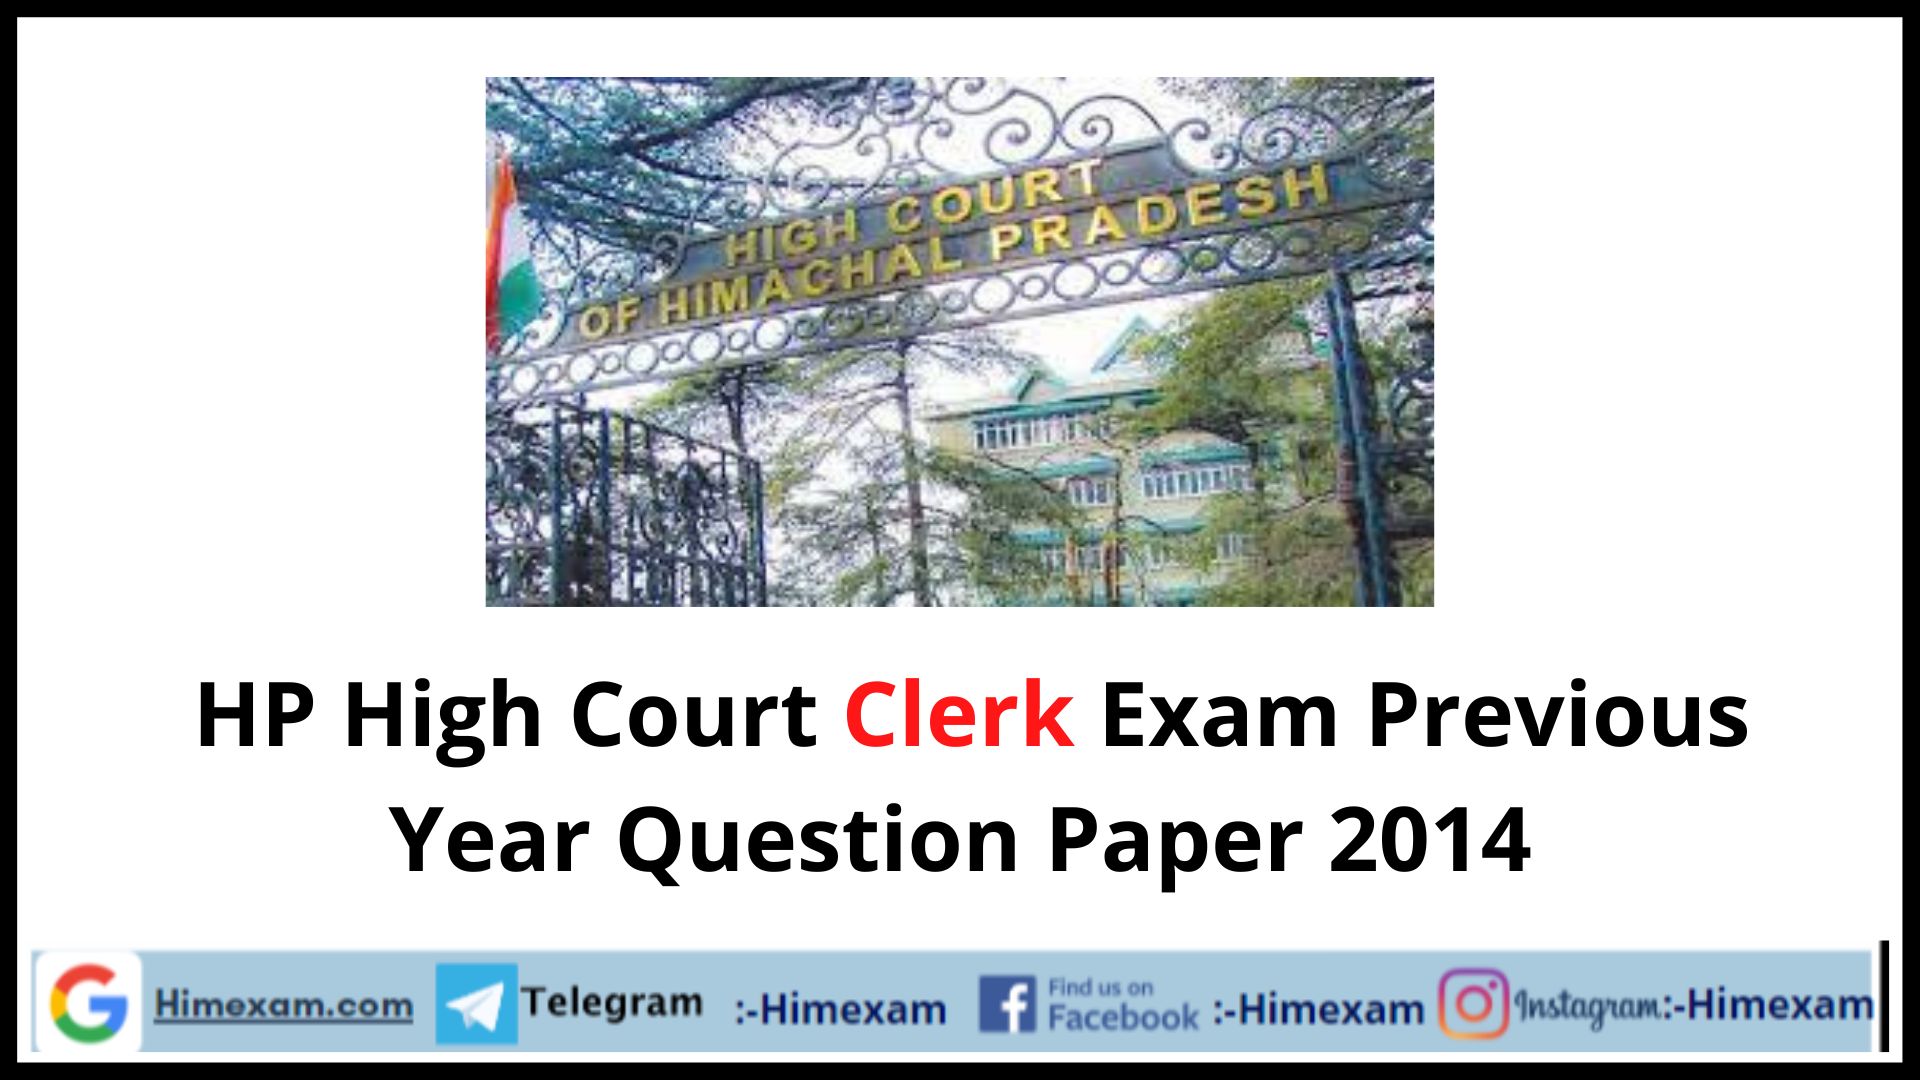 HP High Court Clerk Exam Previous Year Question Paper 2014